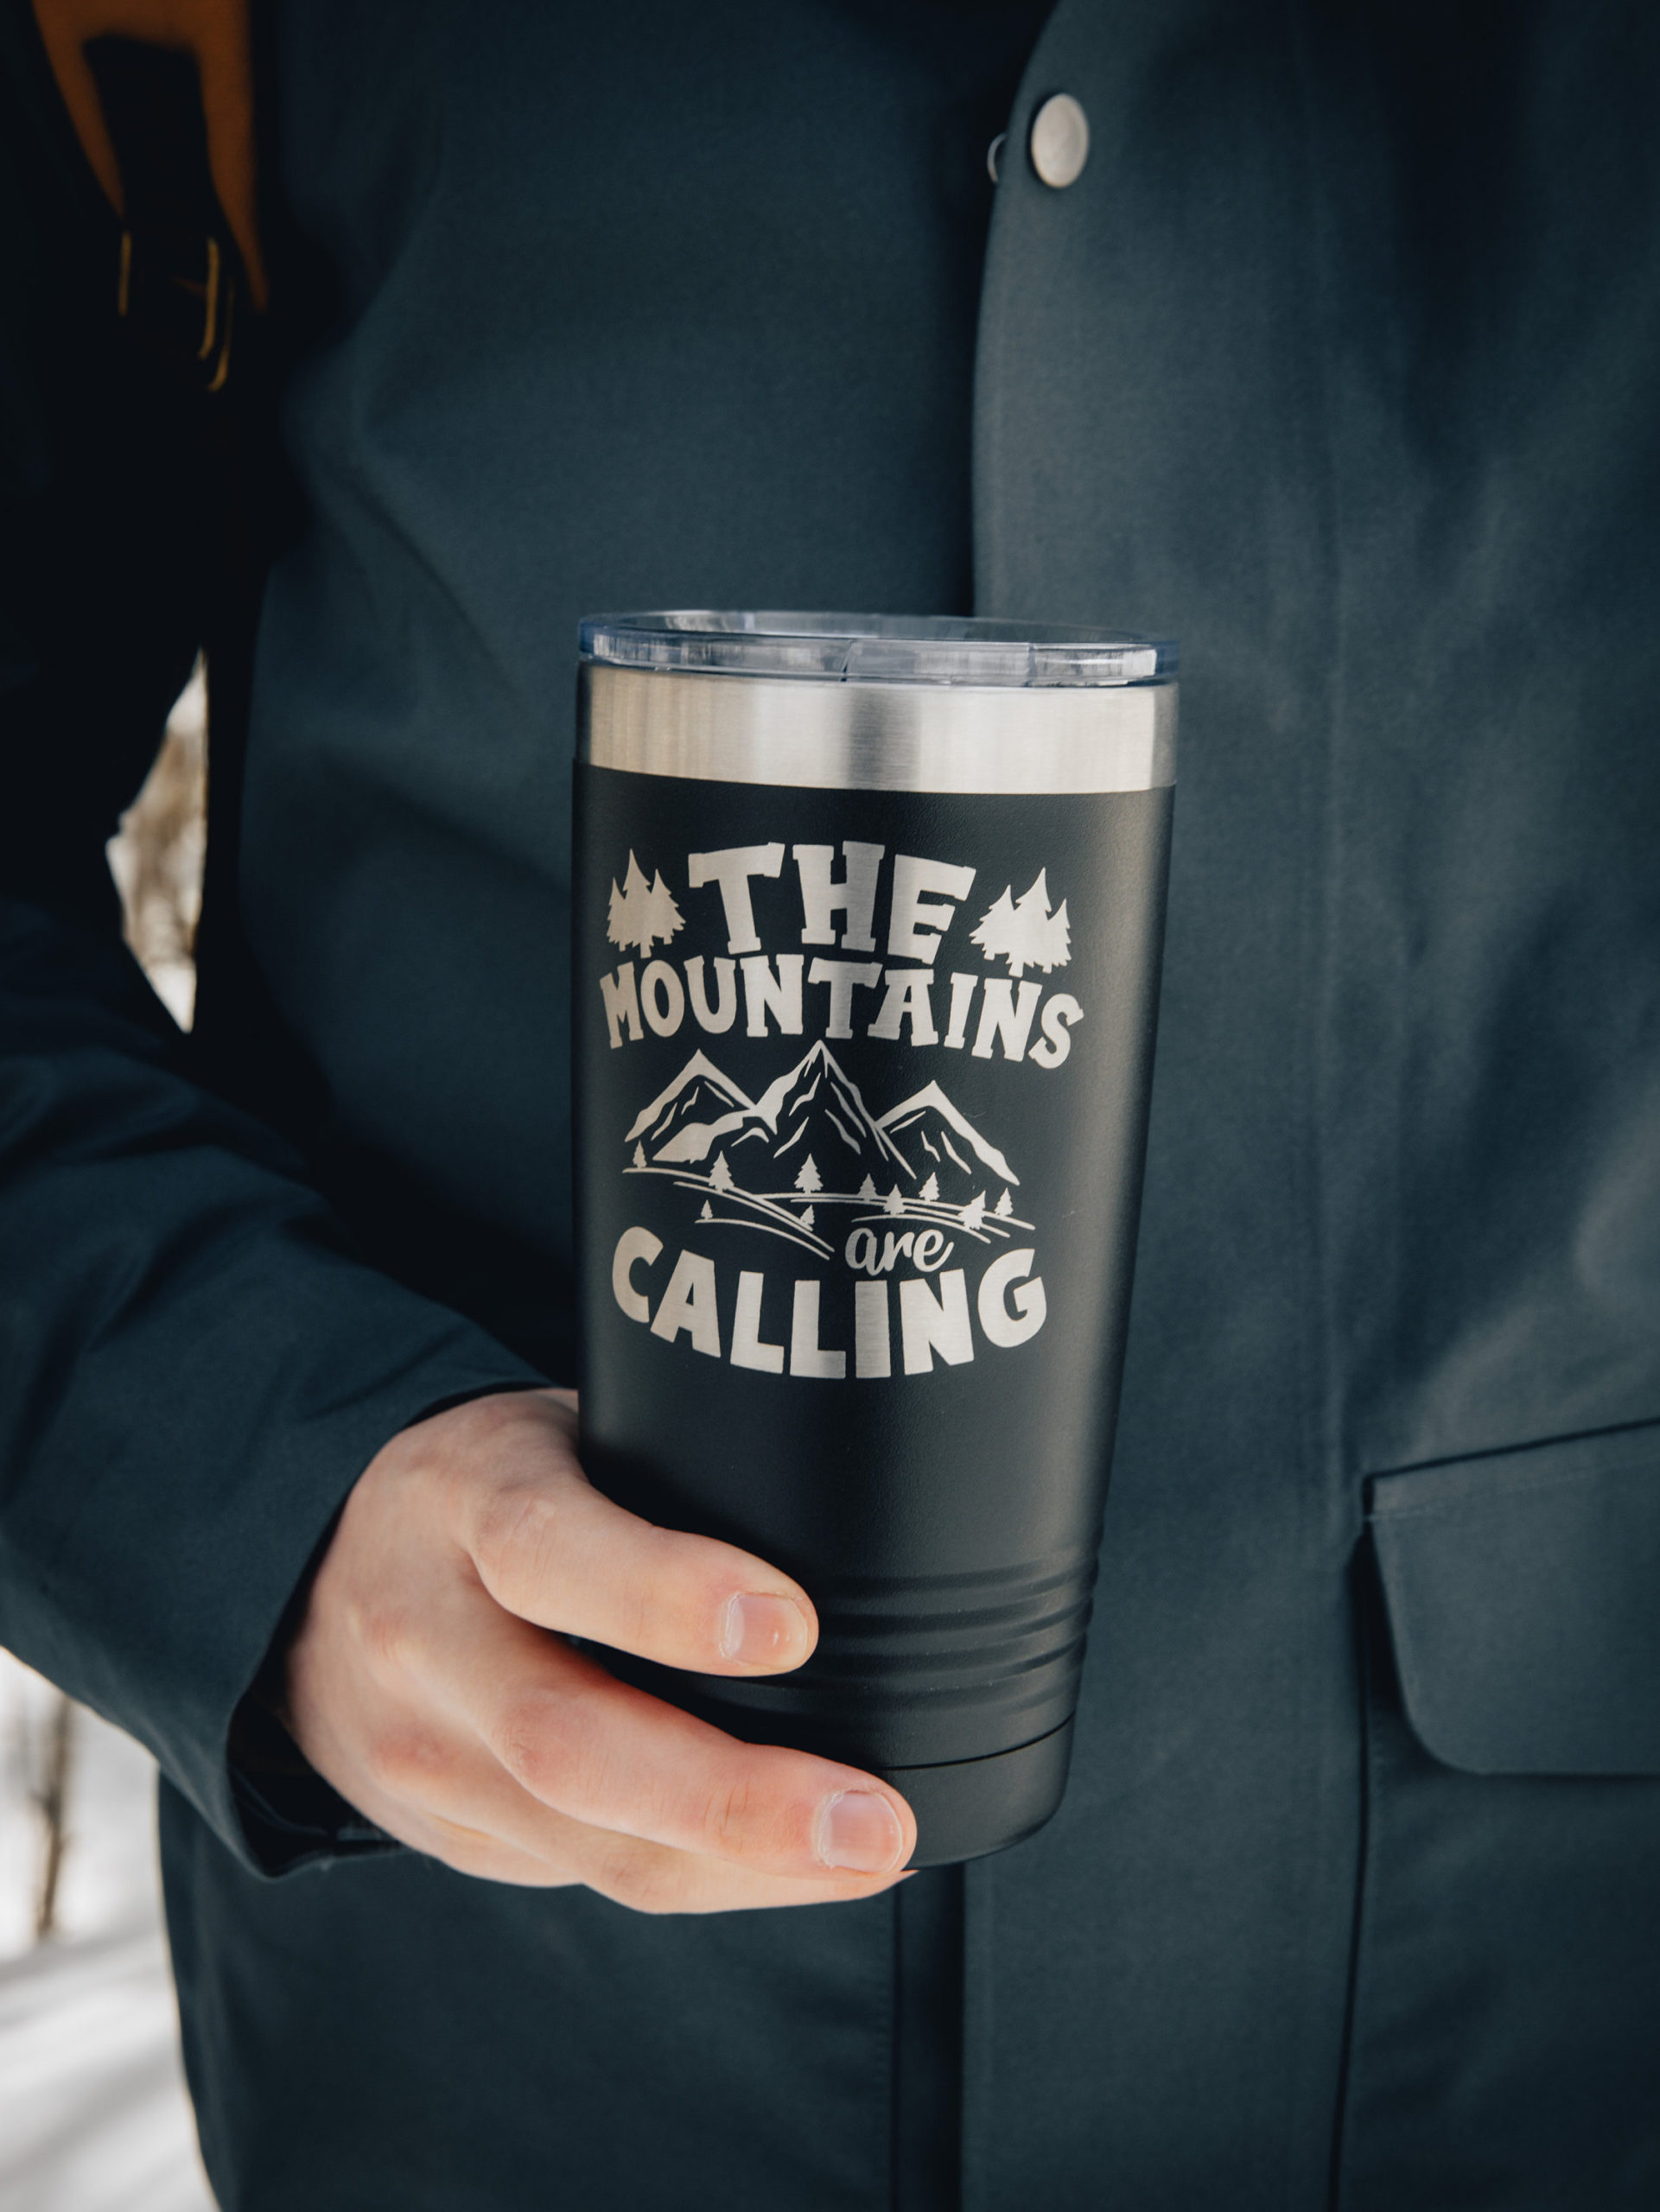 https://3cetching.com/wp-content/uploads/2021/07/the-mountains-are-calling-engraved-polar-camel-stainless-steel-tumbler-insulated-travel-mug-gift-for-hiking-lovers-60f766a6-scaled.jpg